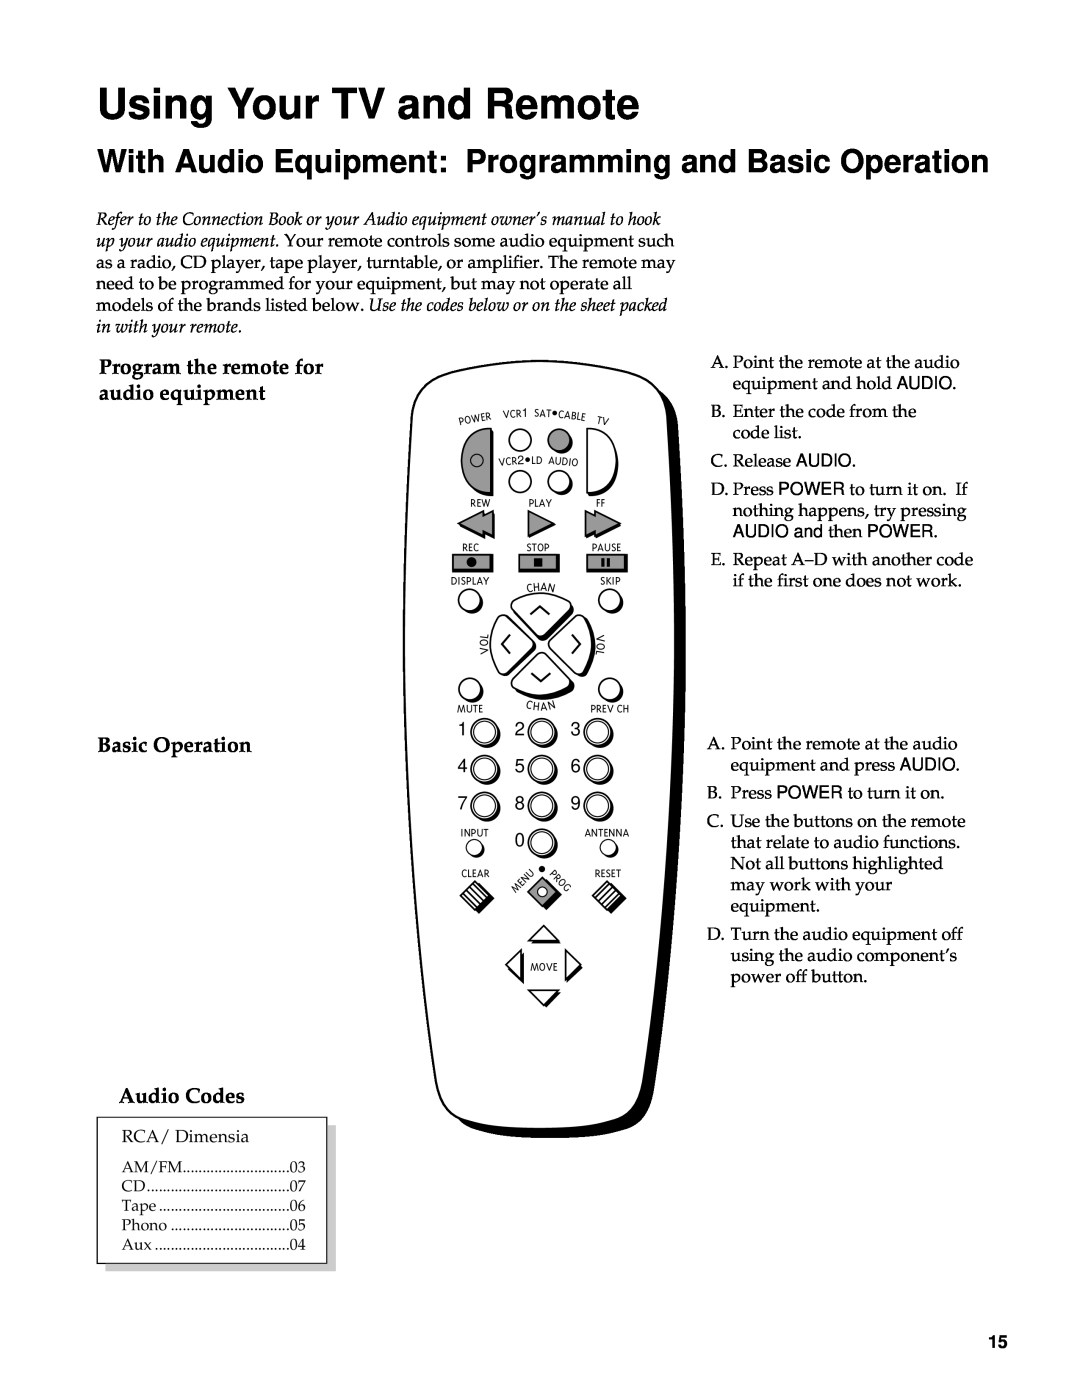 RCA RBA27500, 27000 manual With Audio Equipment Programming and Basic Operation, Program the remote for audio equipment 